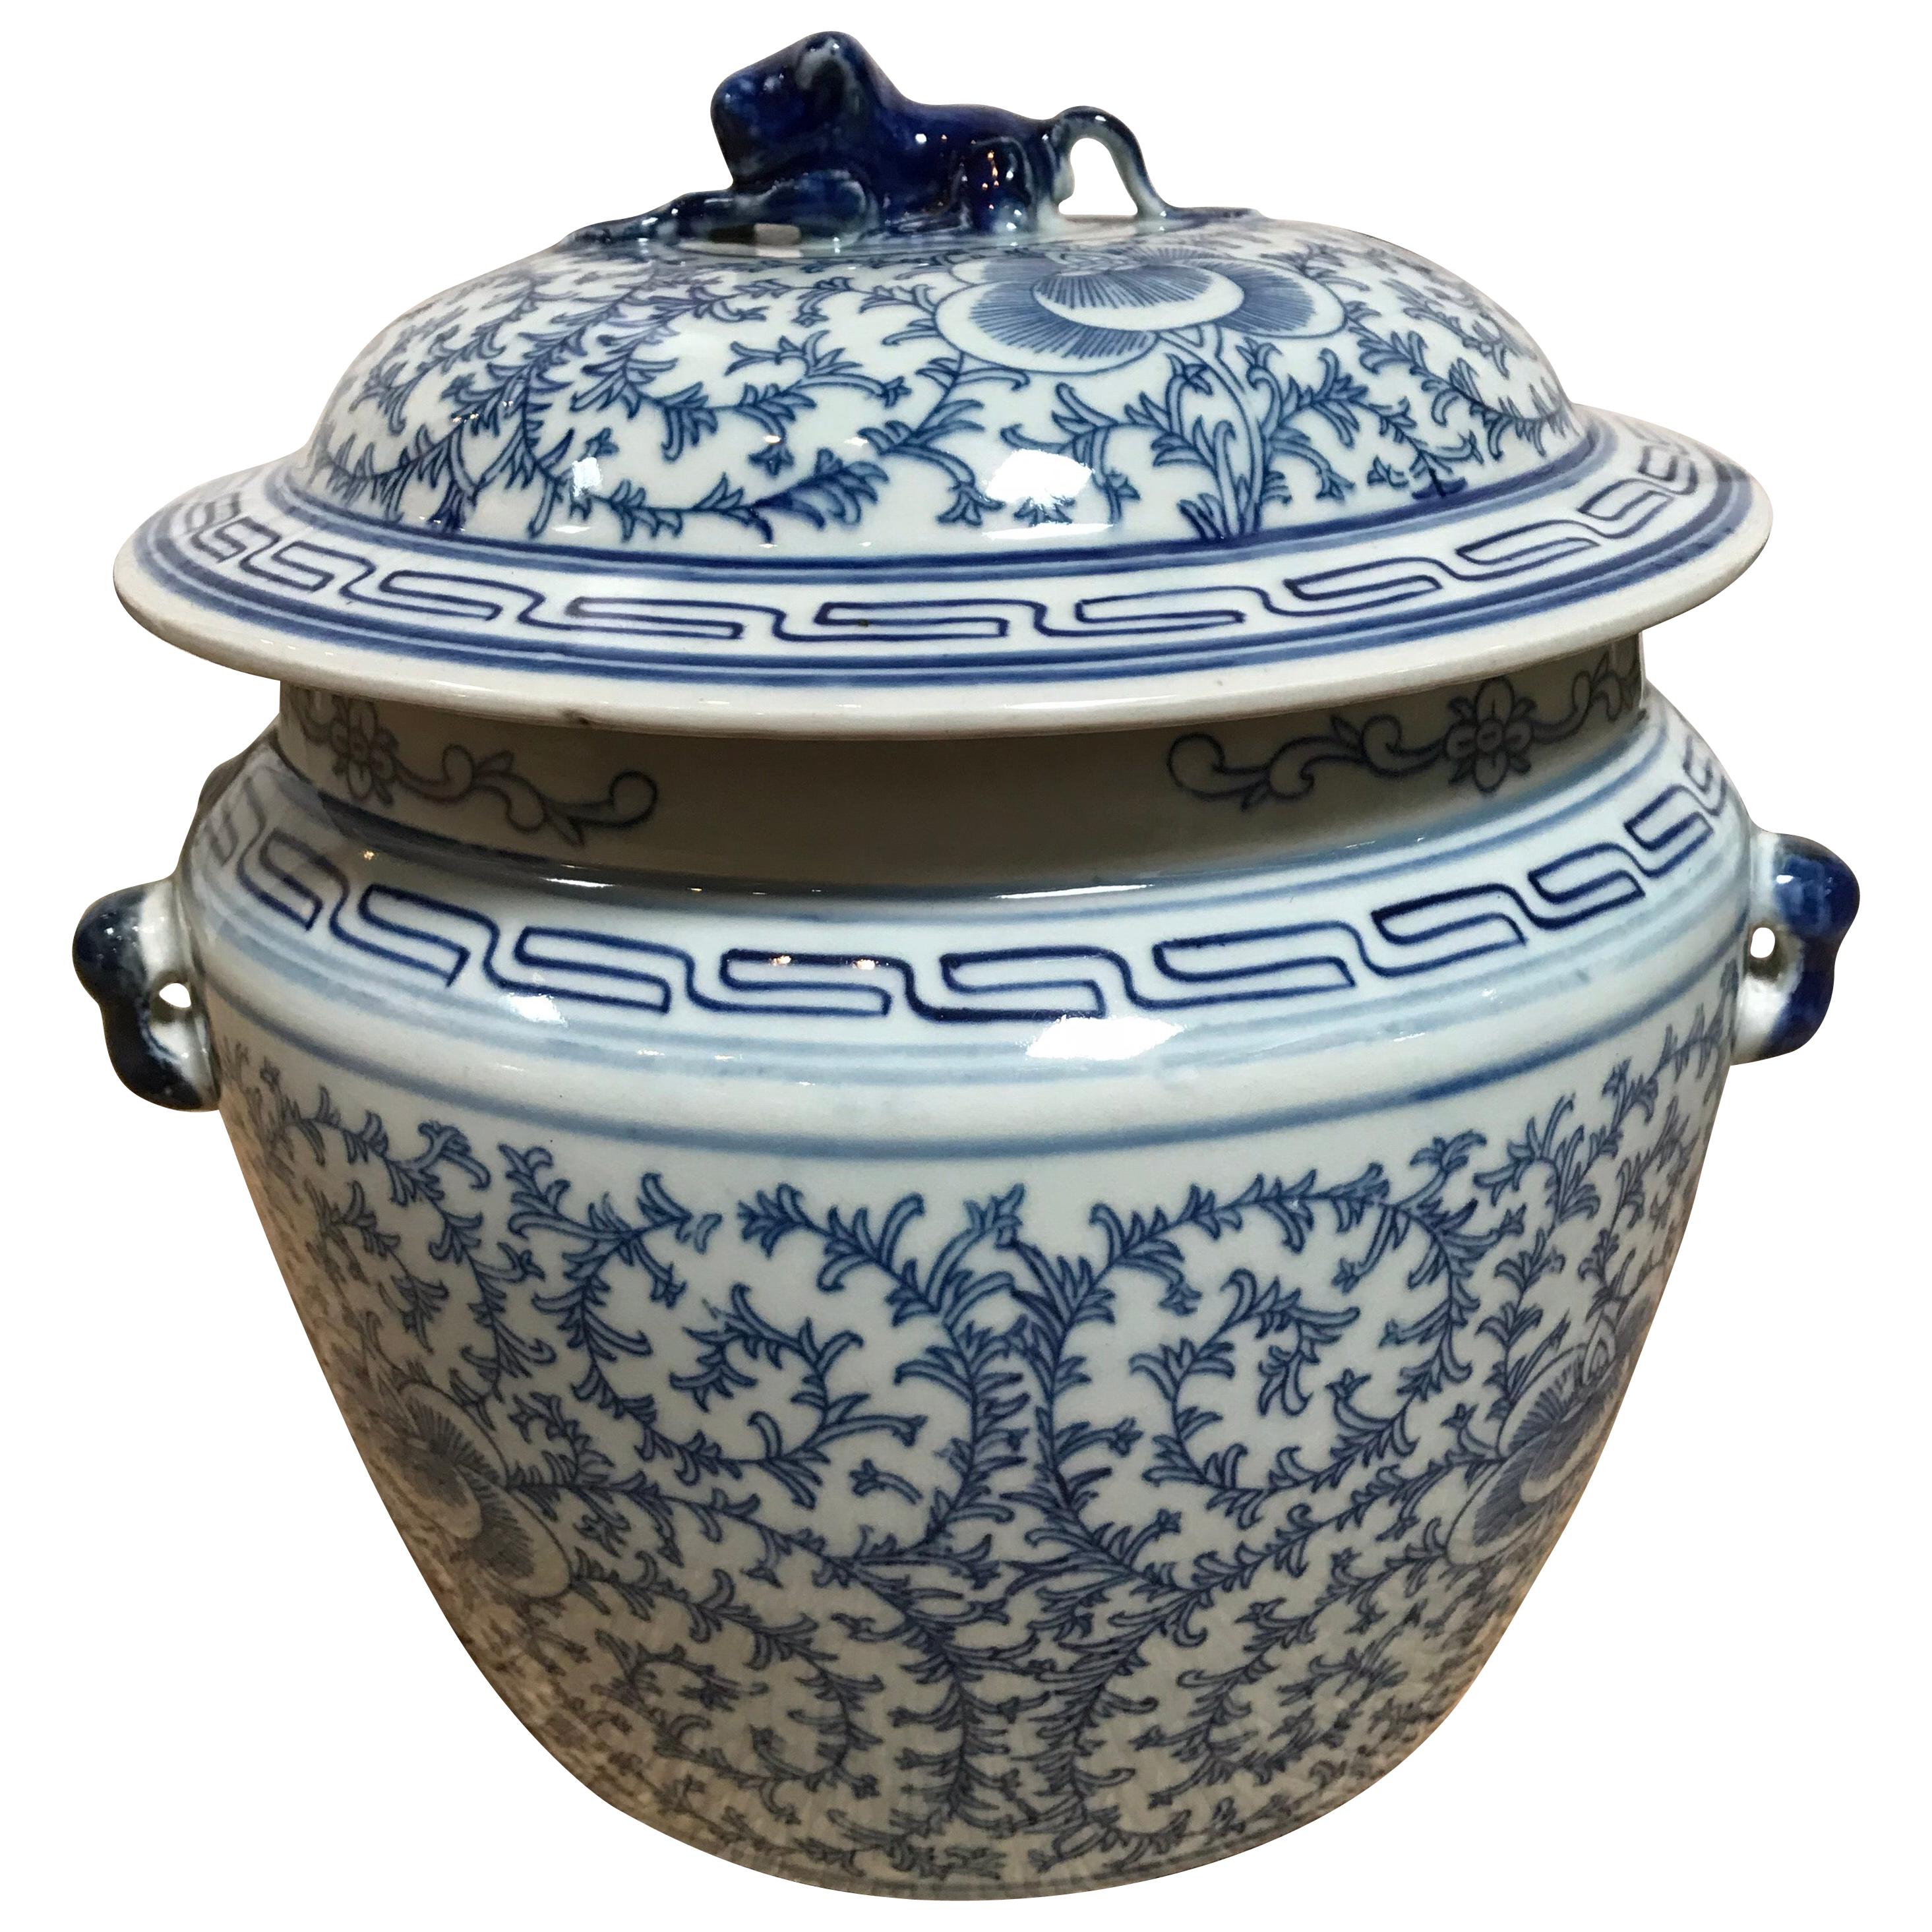 https://a.1stdibscdn.com/blue-and-white-ceramic-chinese-pot-with-lid-for-sale/1121189/f_158751921566544768289/15875192_master.jpg